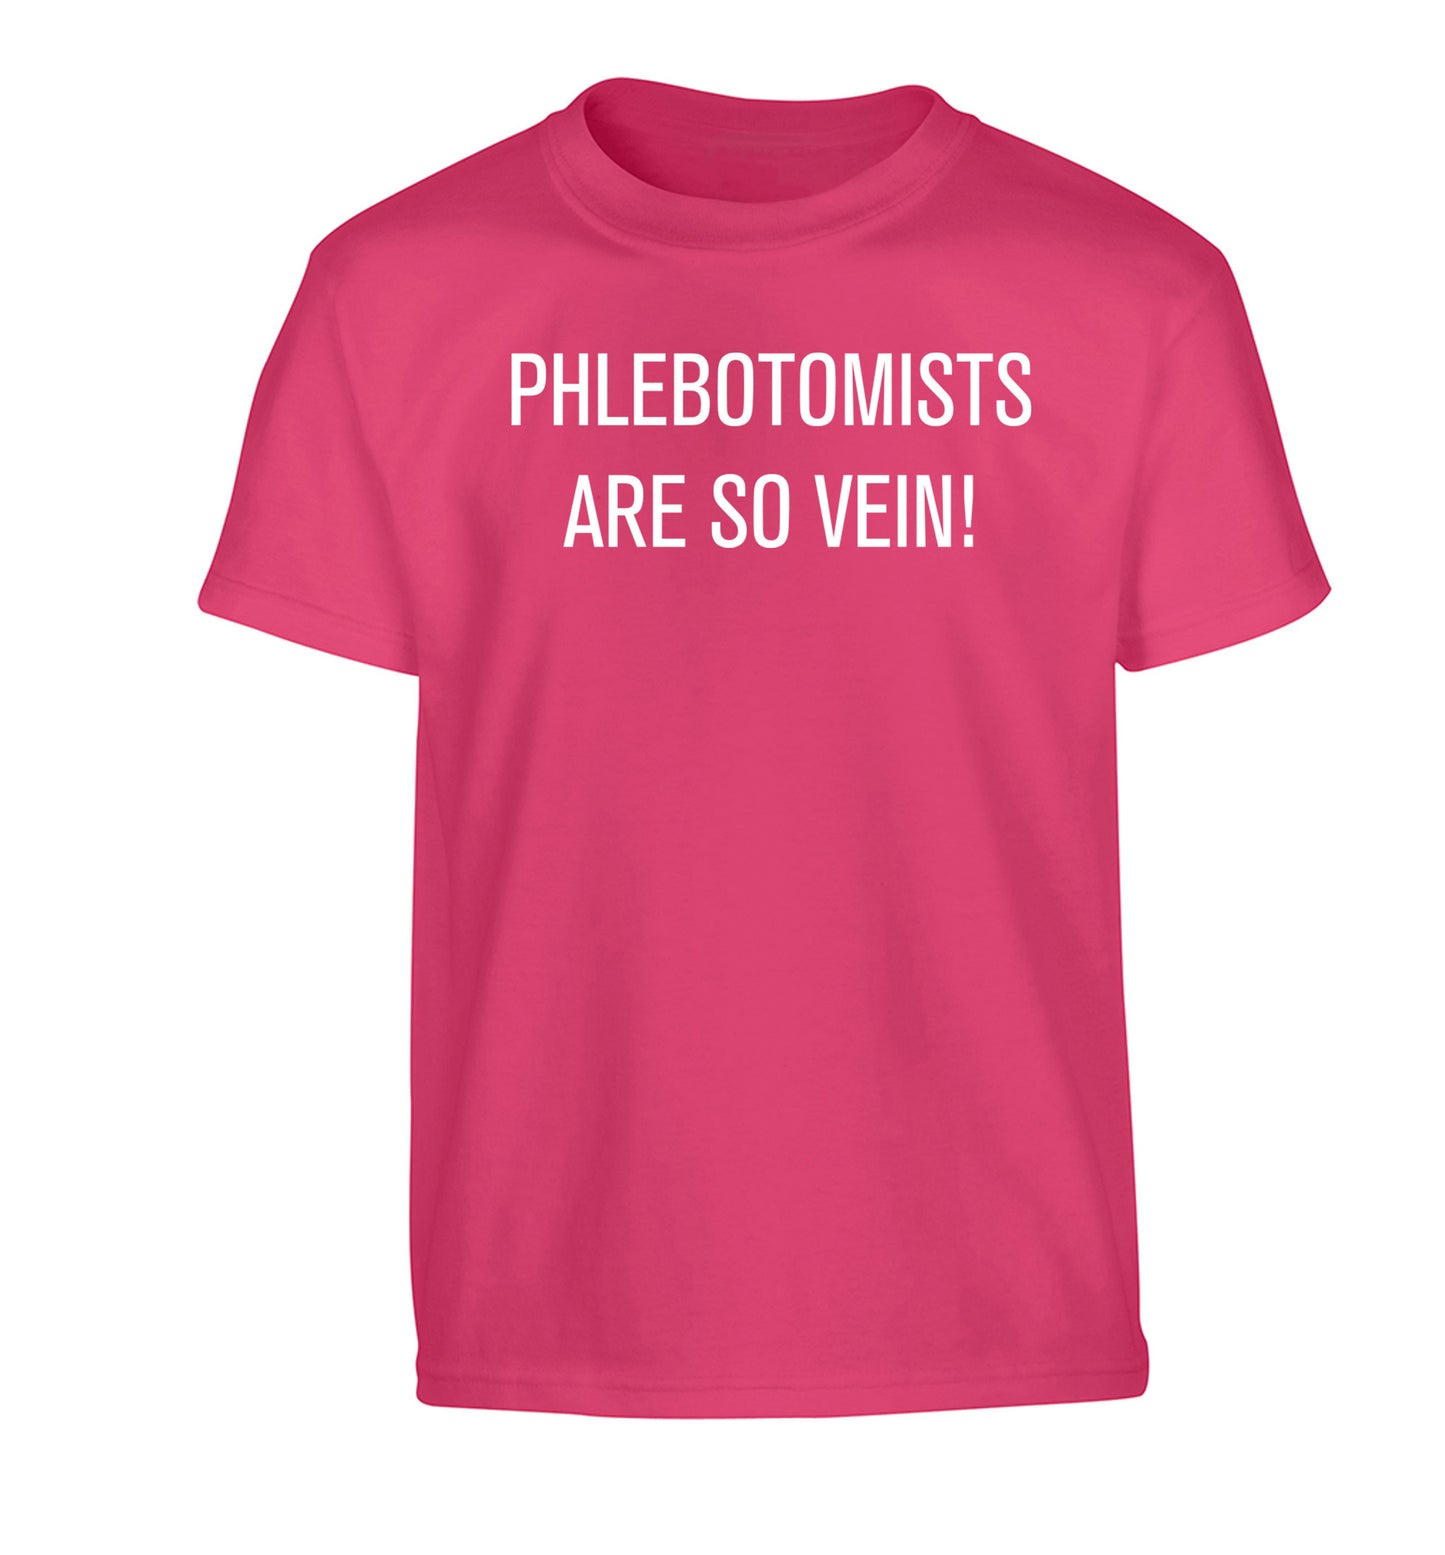 Phlebotomists are so vein! Children's pink Tshirt 12-14 Years